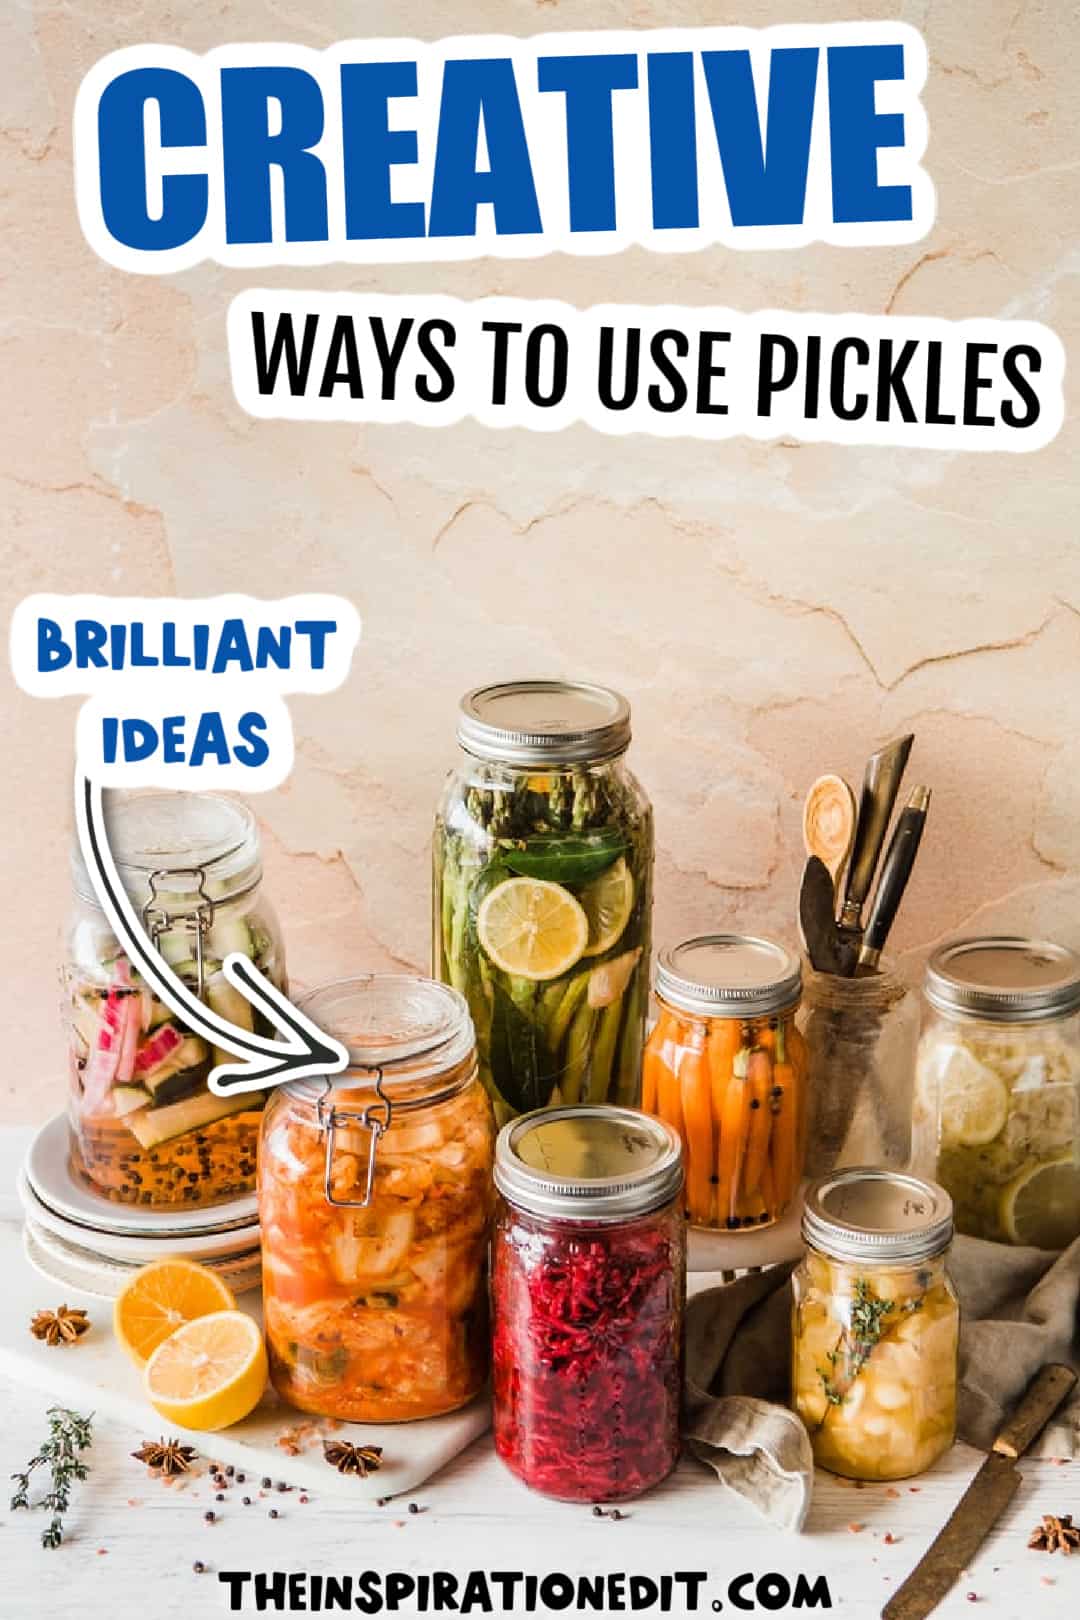 3 Creative Pickle Ideas to Impress Your Family and Friends · The